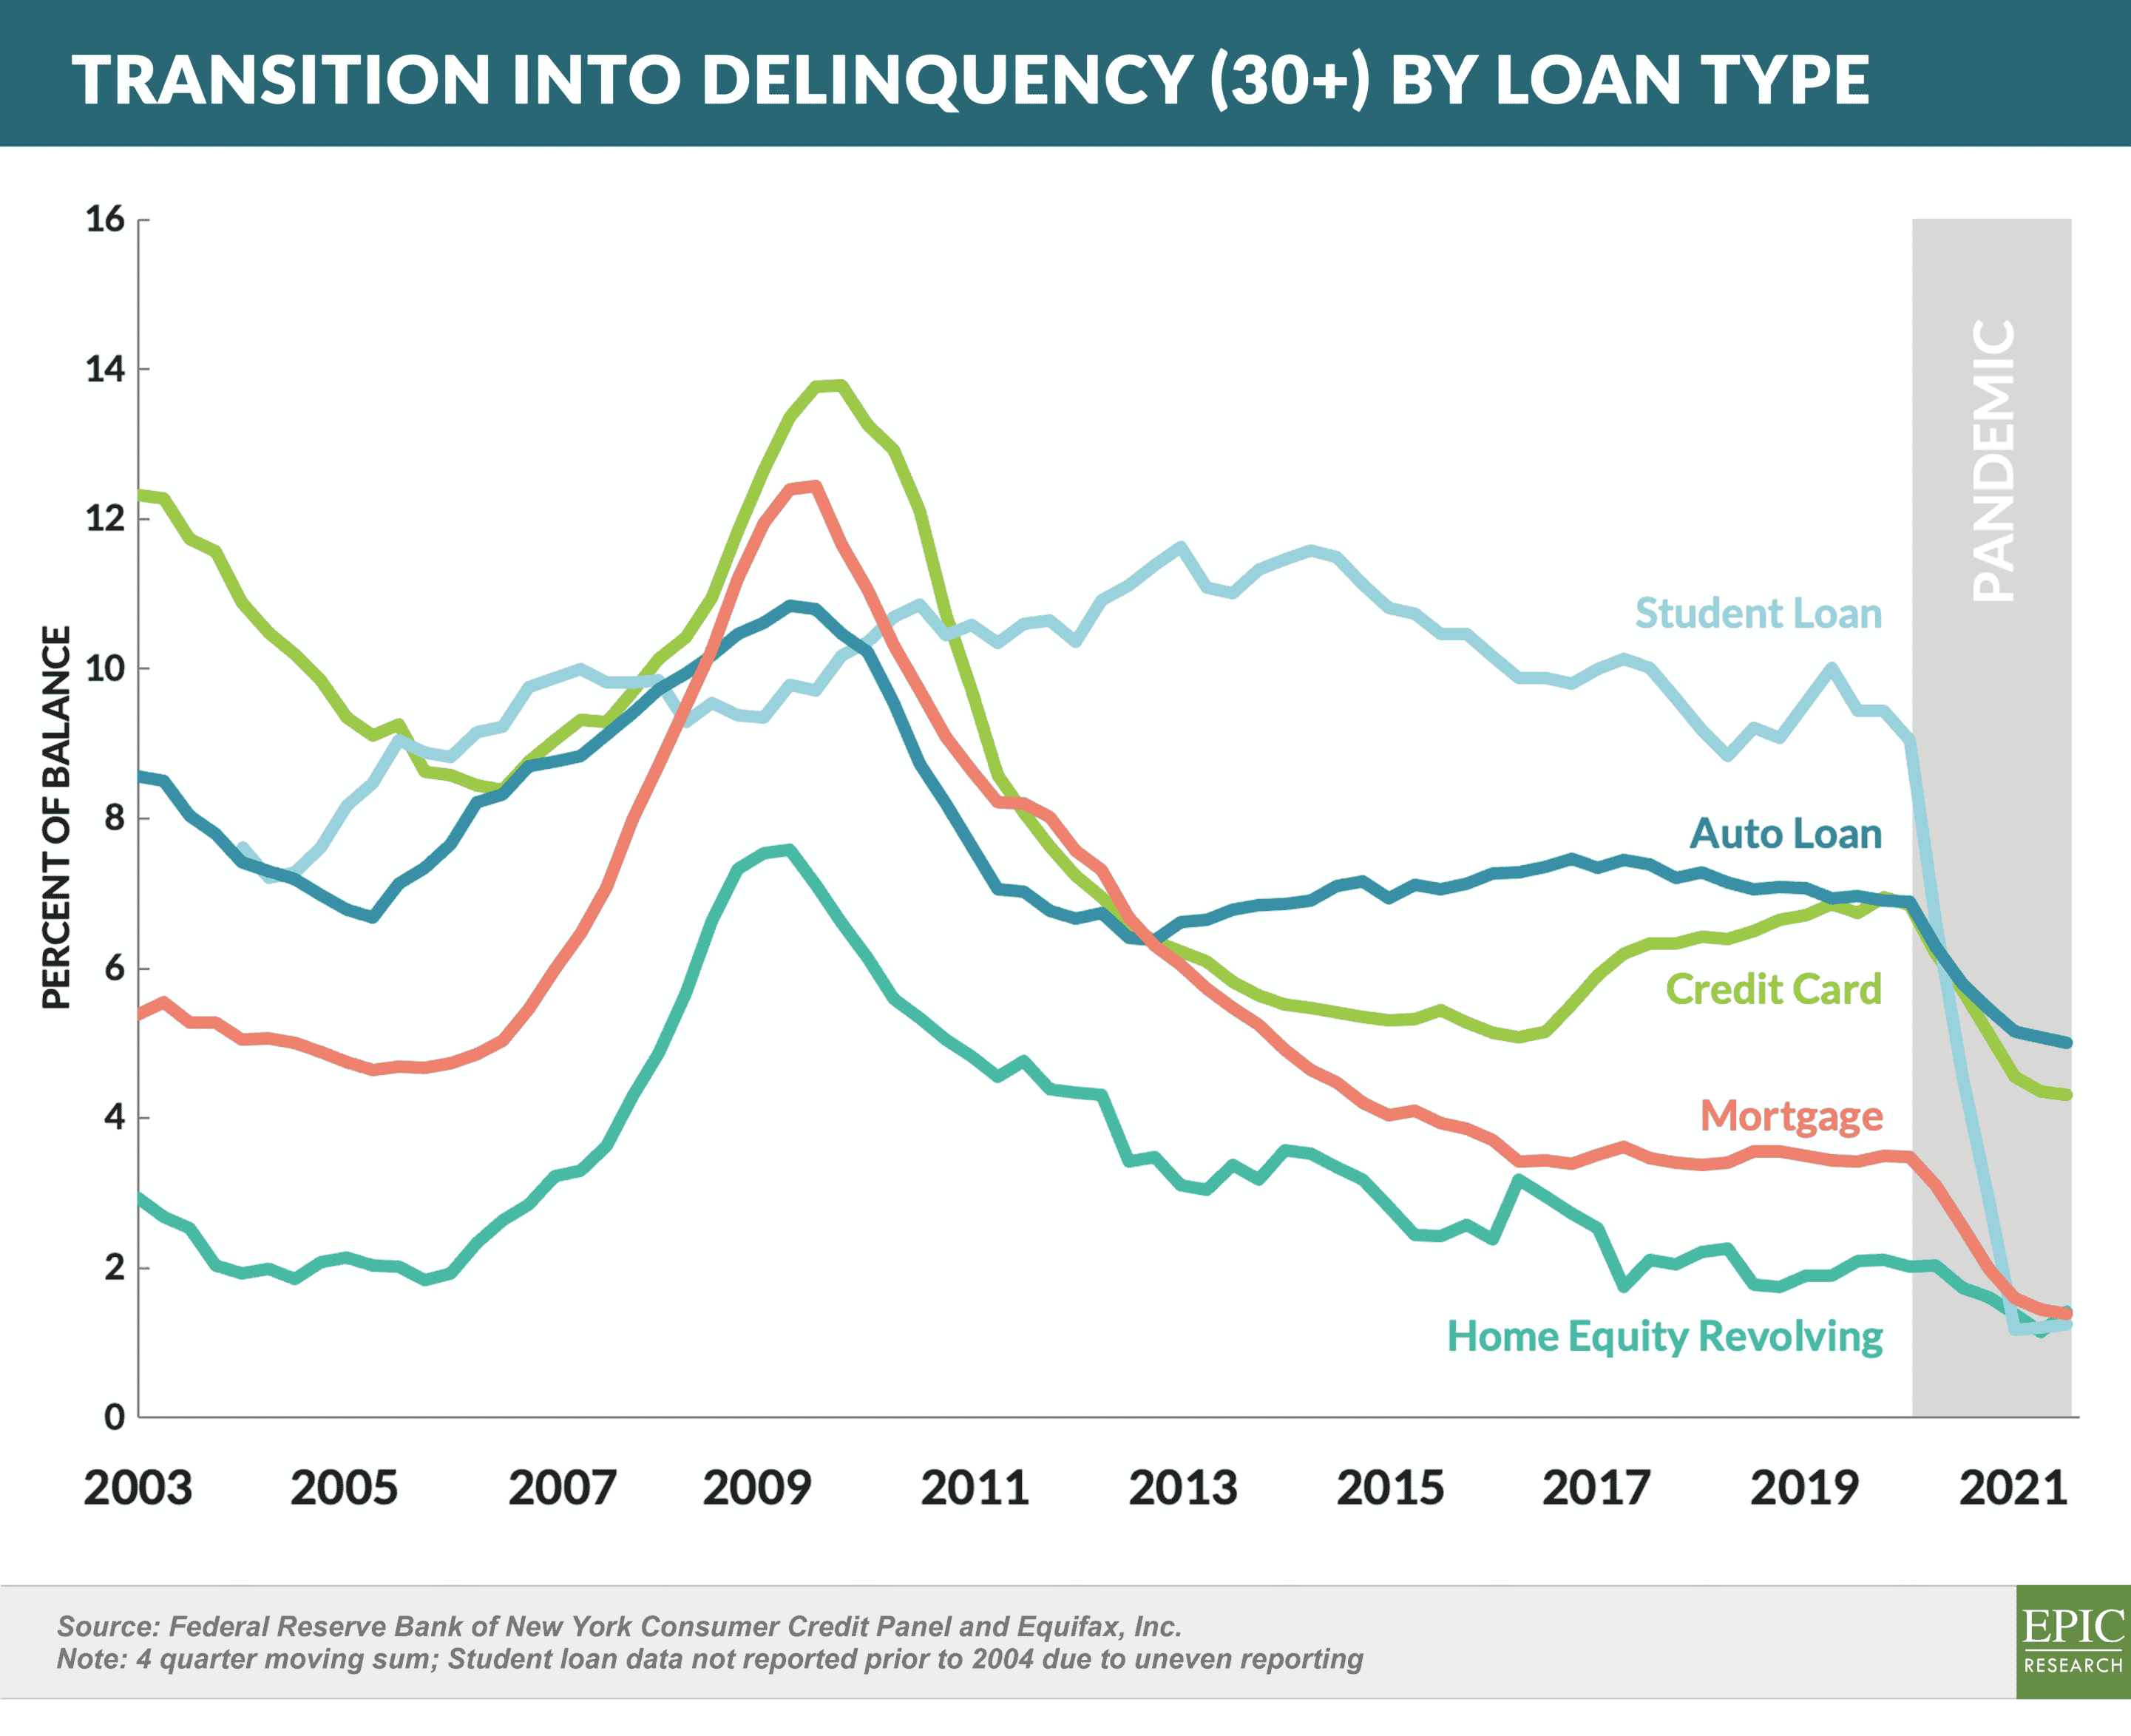 Transition into Delinquency (30+) by Loan Type